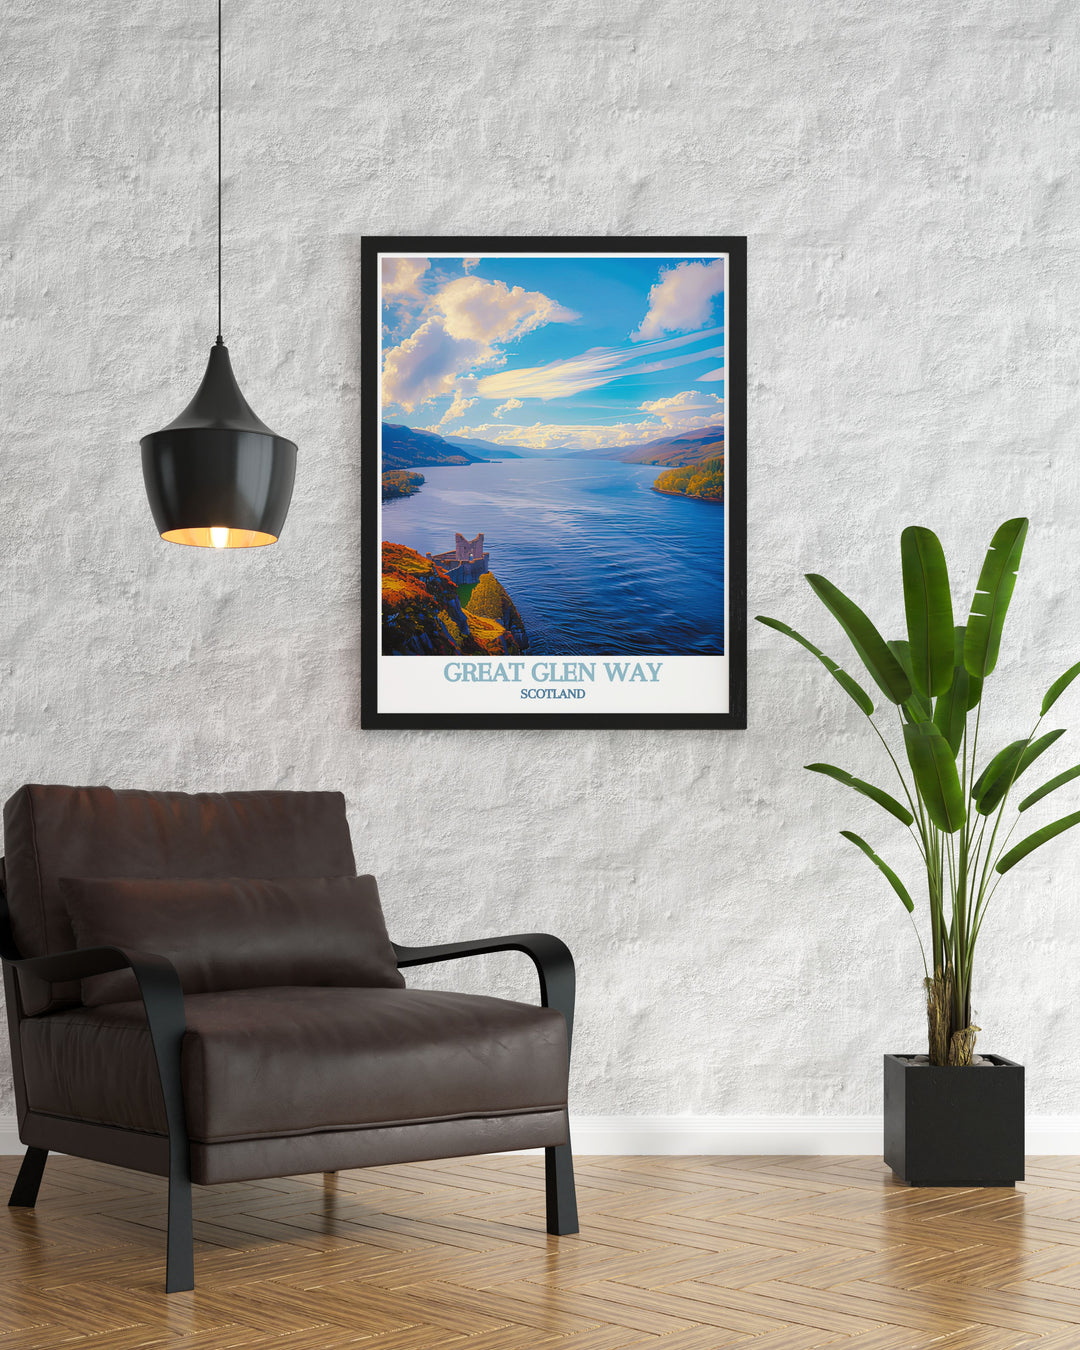 A stunning illustration of Ben Nevis and the Scottish Highlands, this art print offers a panoramic view of Scotlands natural wonders, making it a perfect piece for nature lovers and adventure seekers.